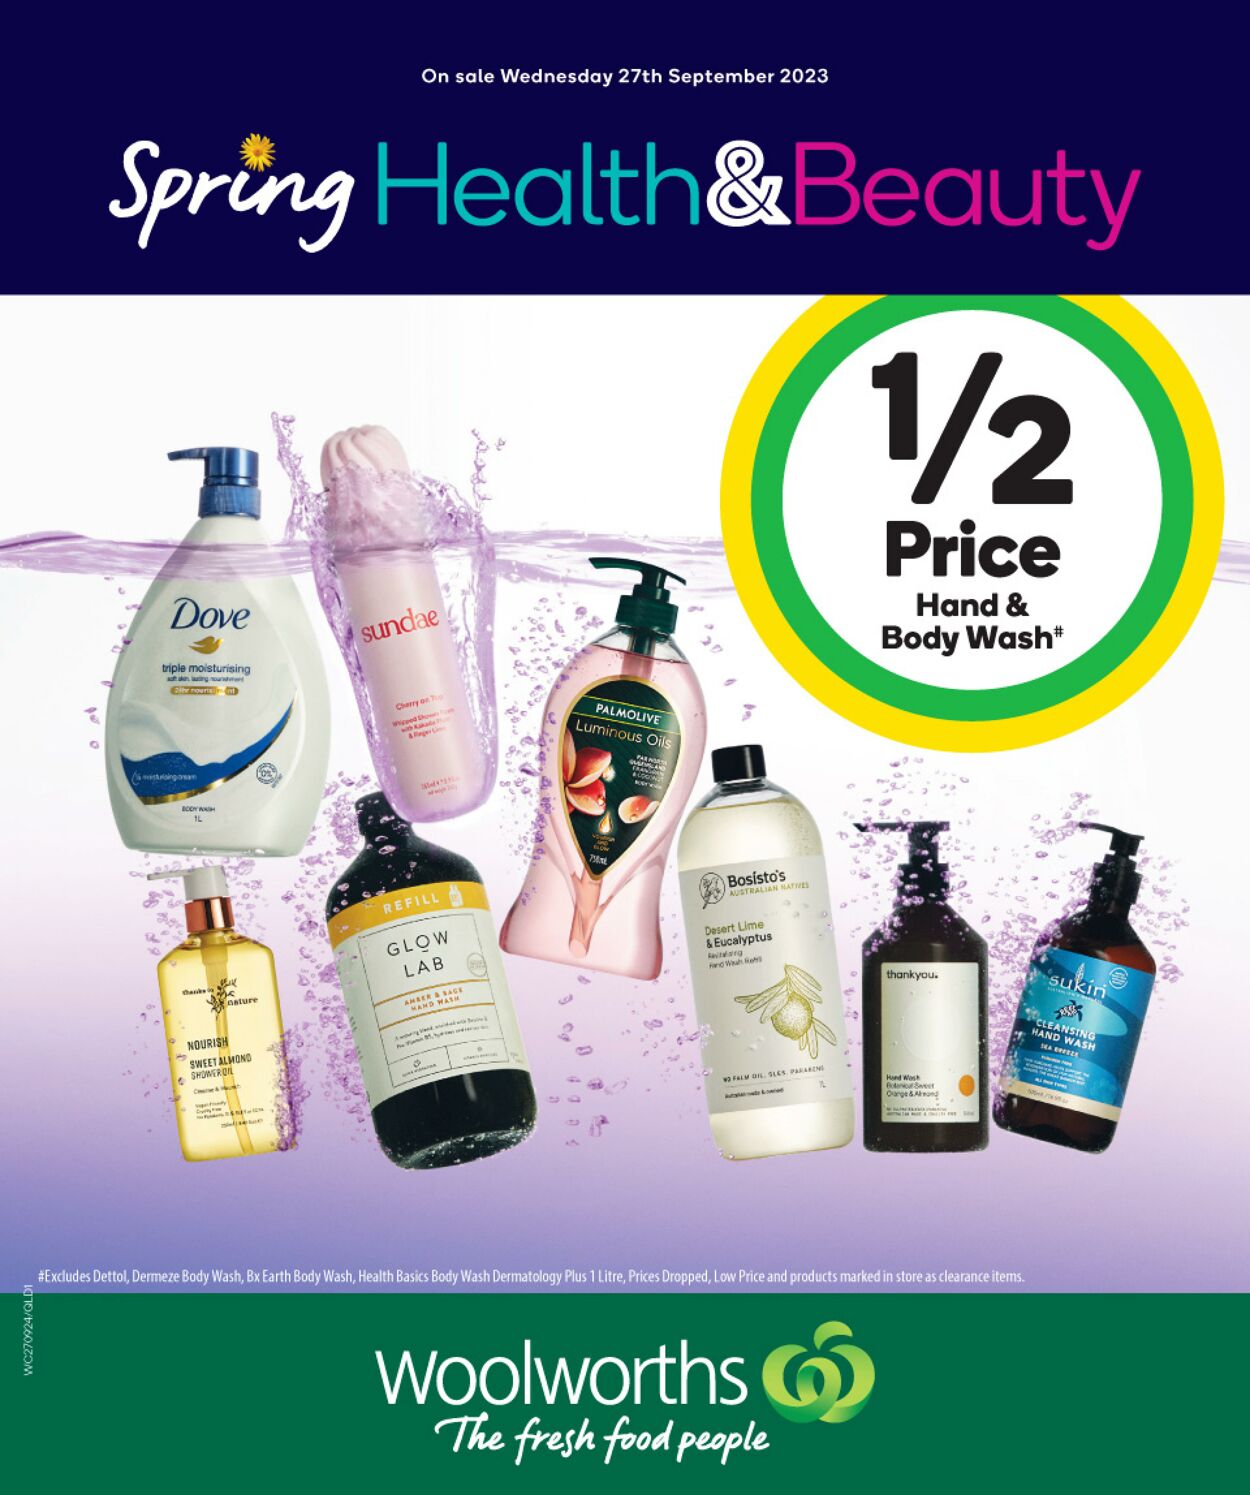 Catalogue Woolworths - Spring Health & Beauty QLD 27 Sep, 2023 - 3 Oct, 2023